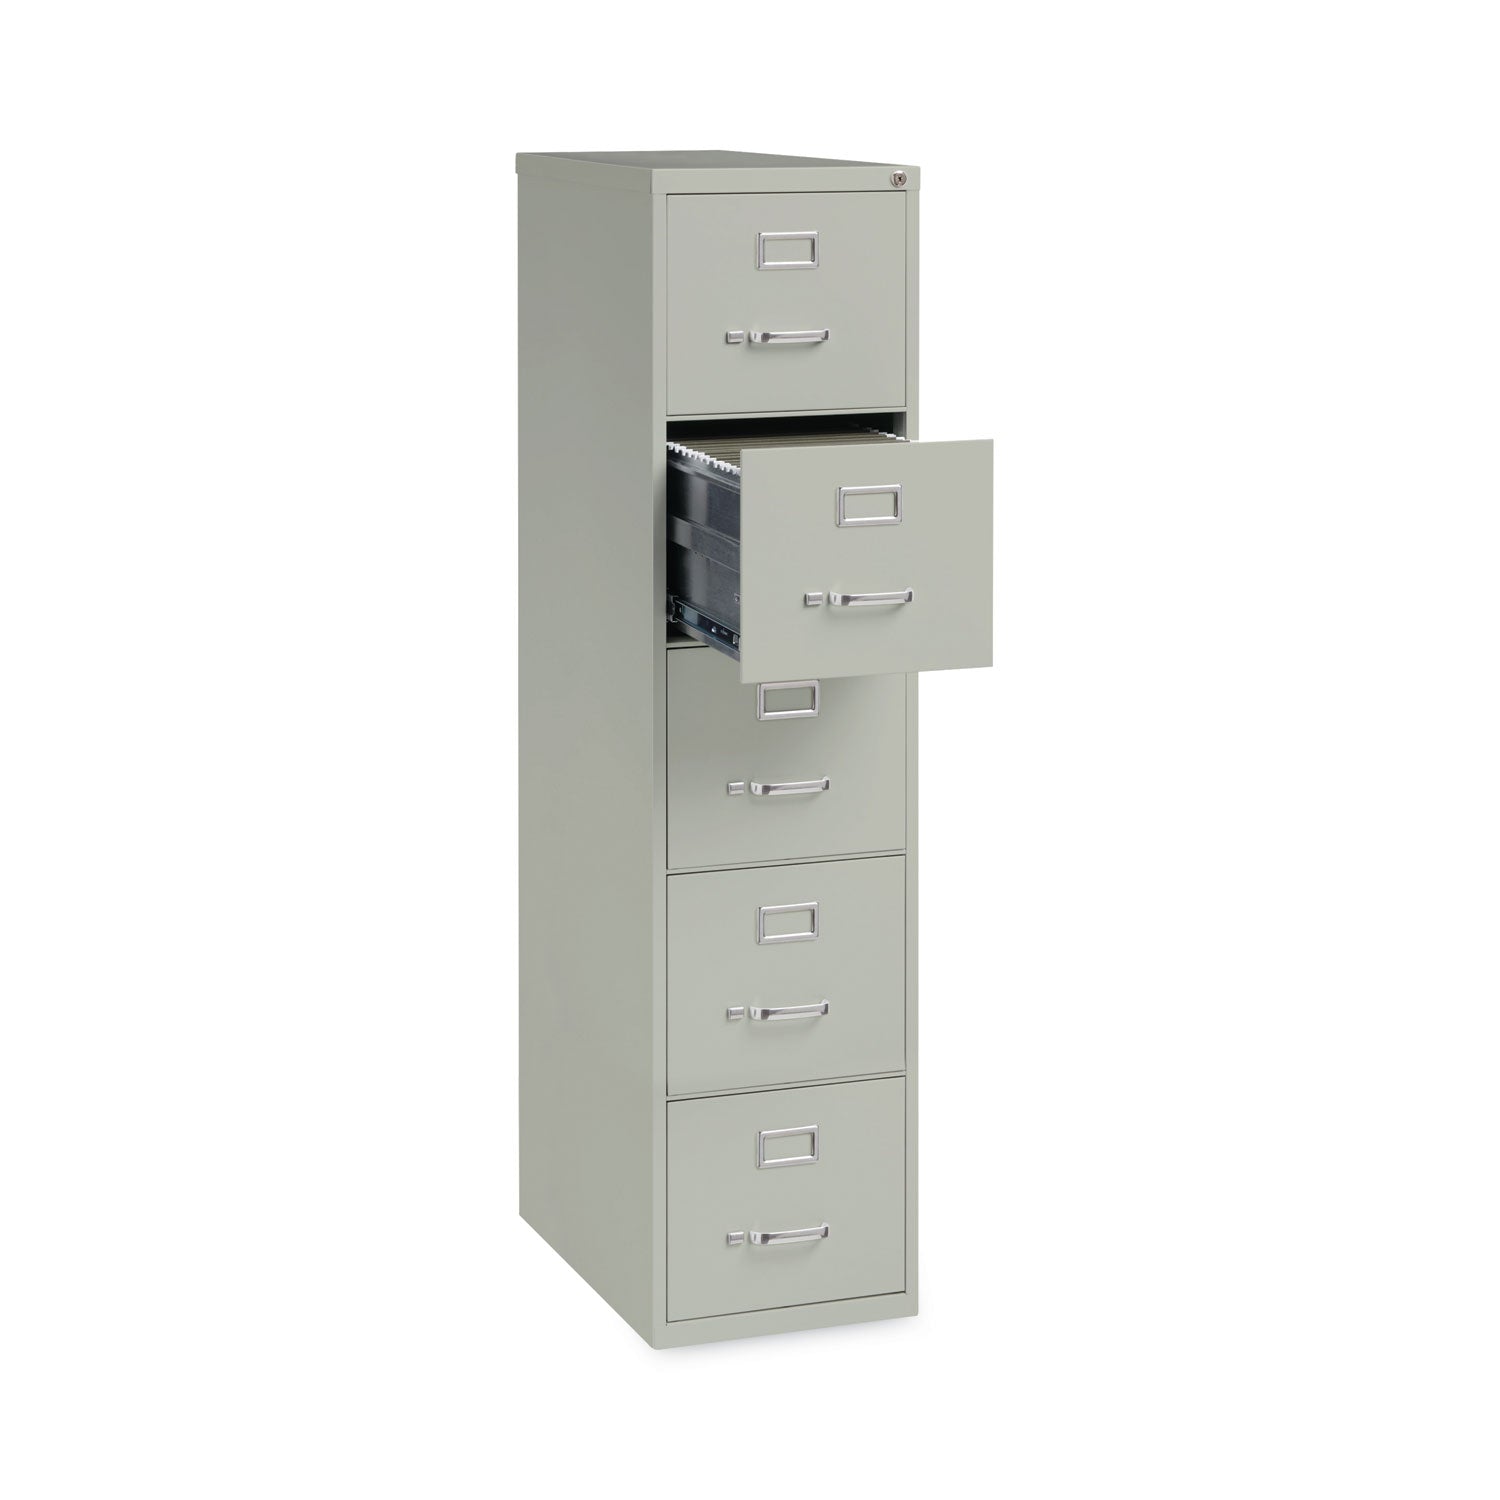 vertical-letter-file-cabinet-5-letter-size-file-drawers-light-gray-15-x-265-x-6137_hid17779 - 4